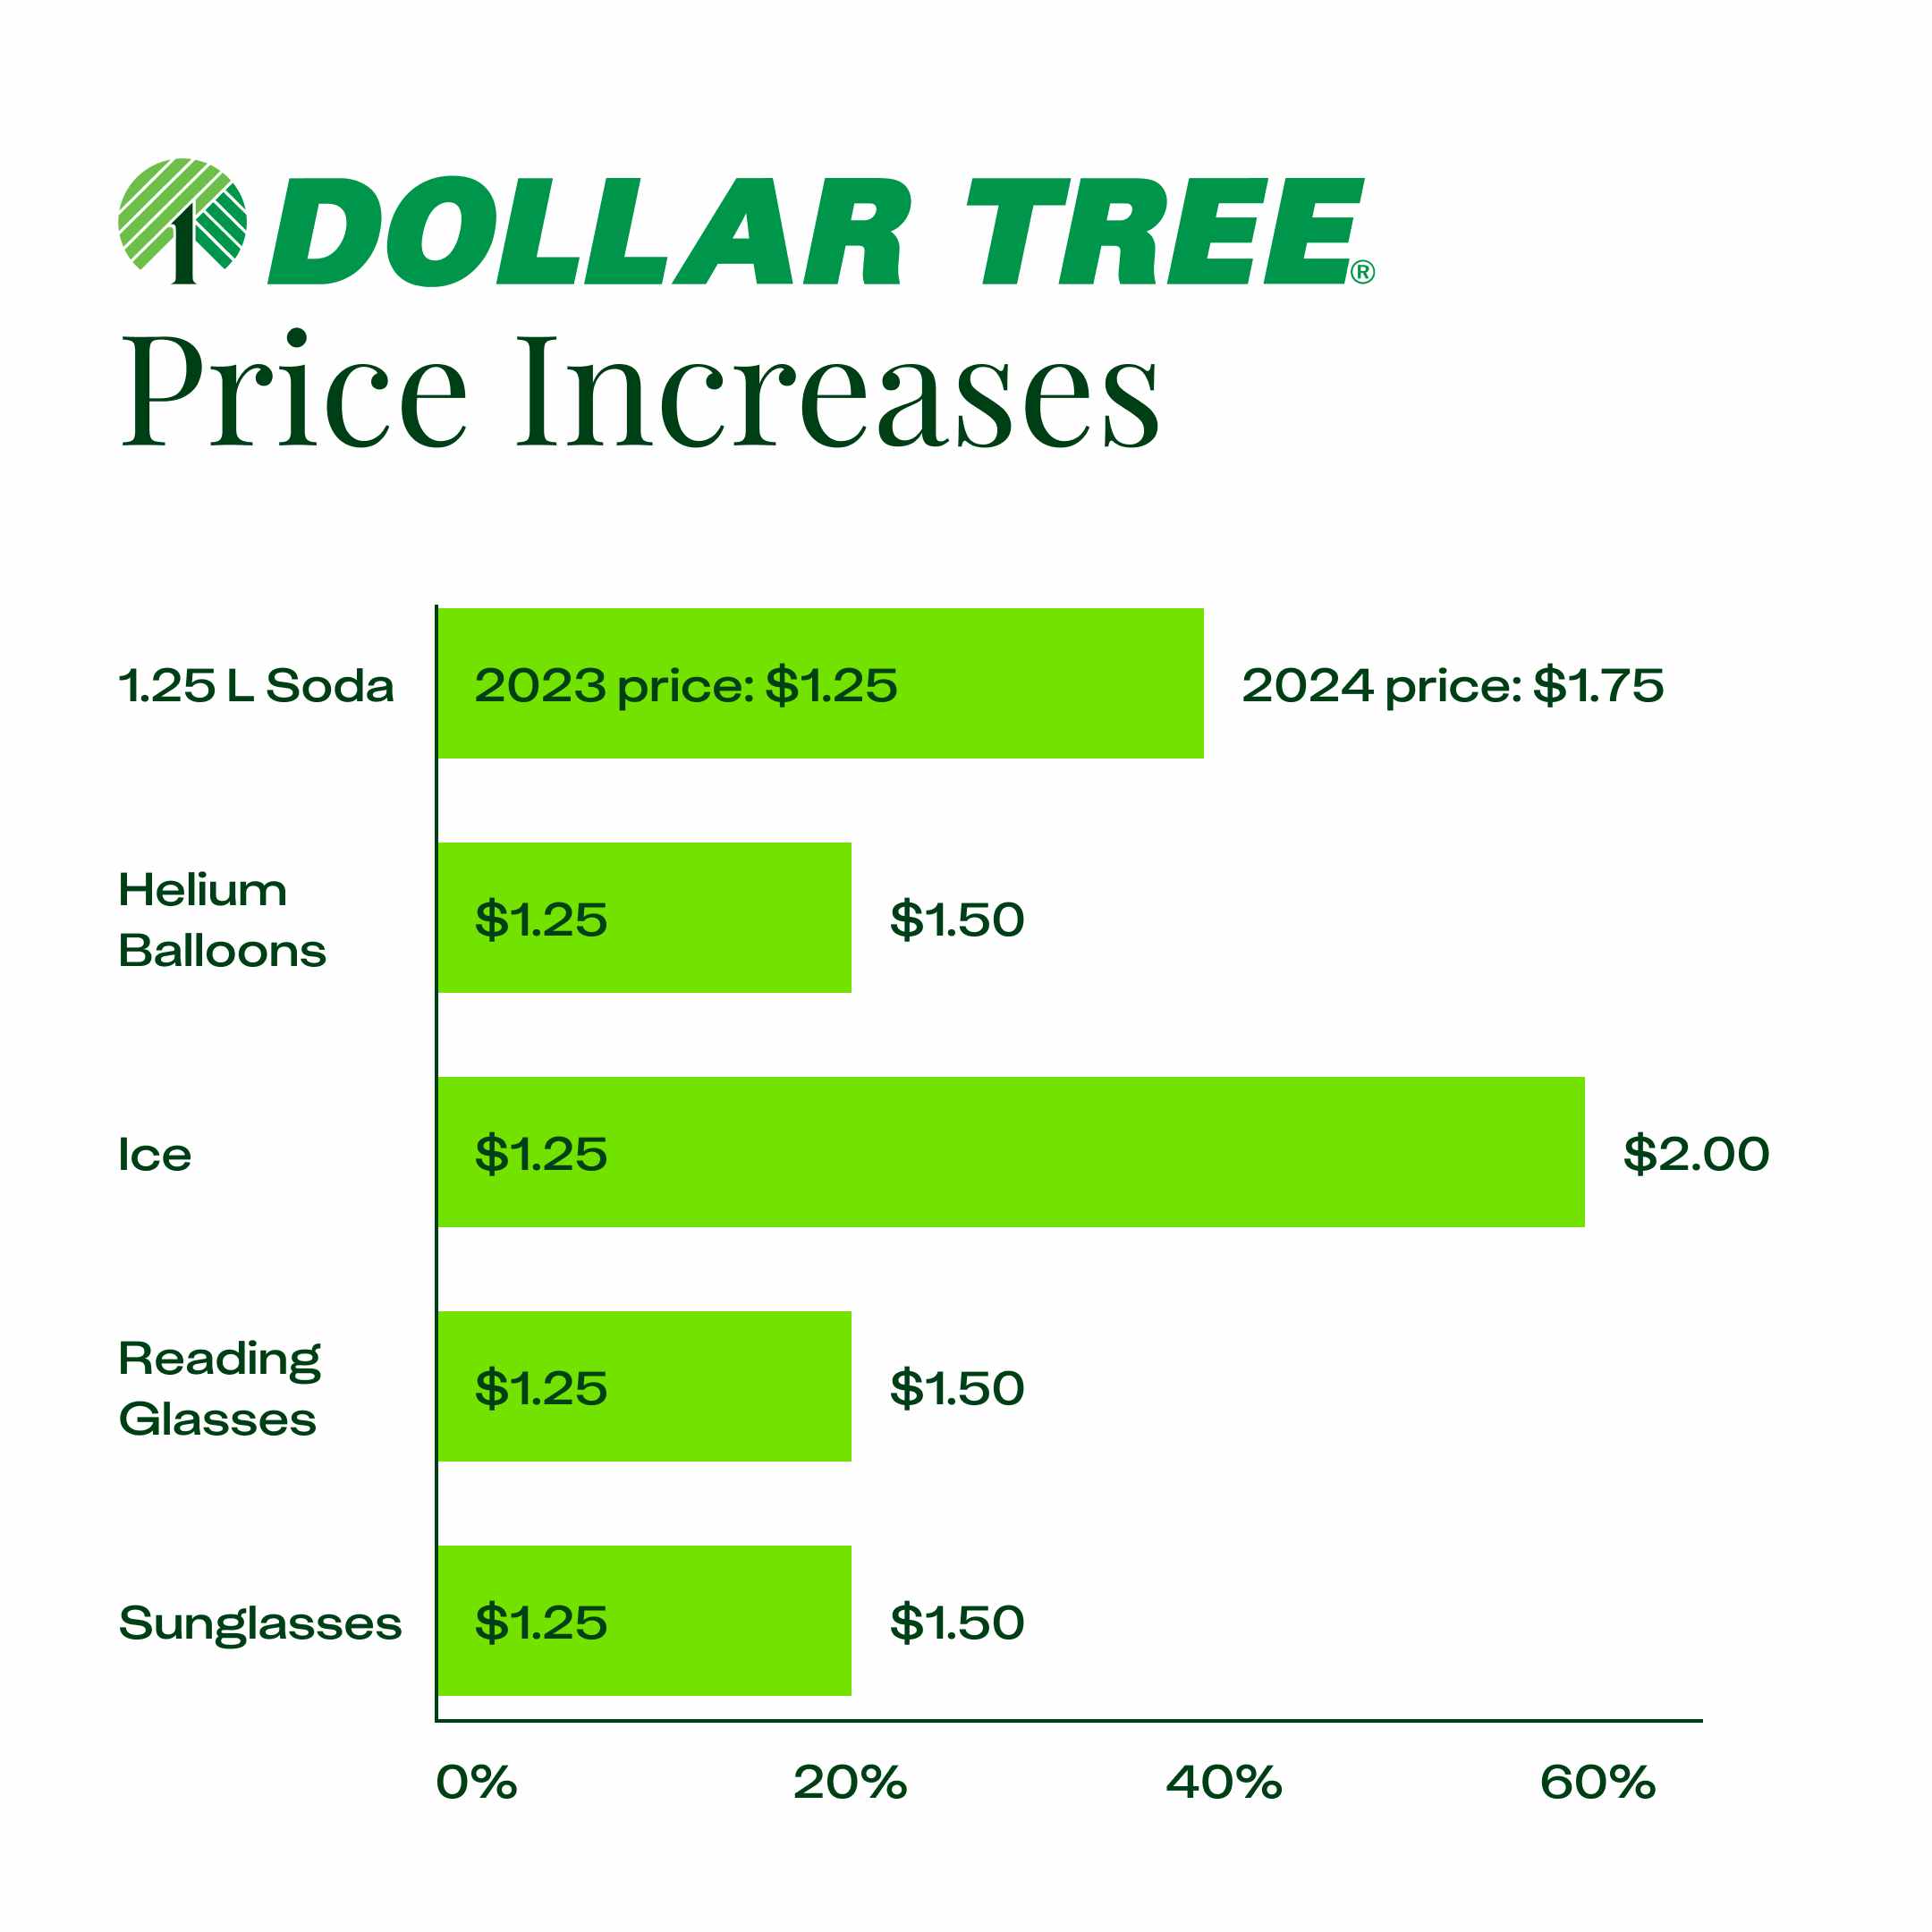 Dollar-tree-price-increases-graphic